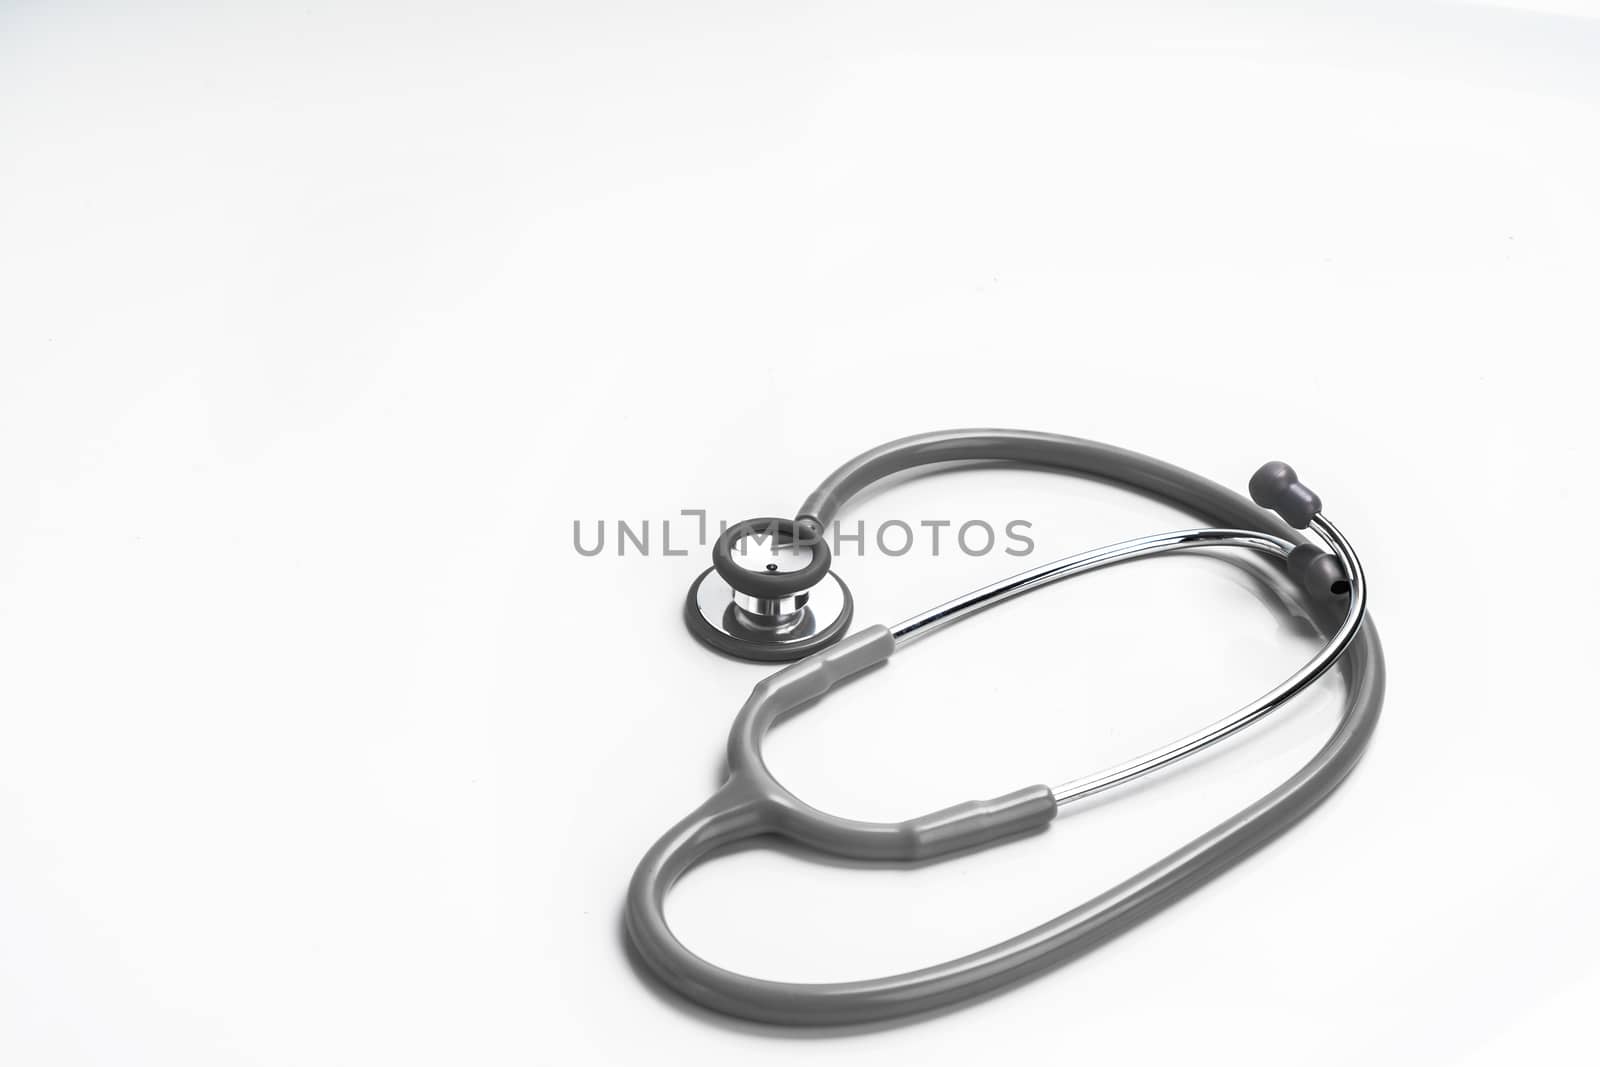 Stethoscope for doctor and copy space